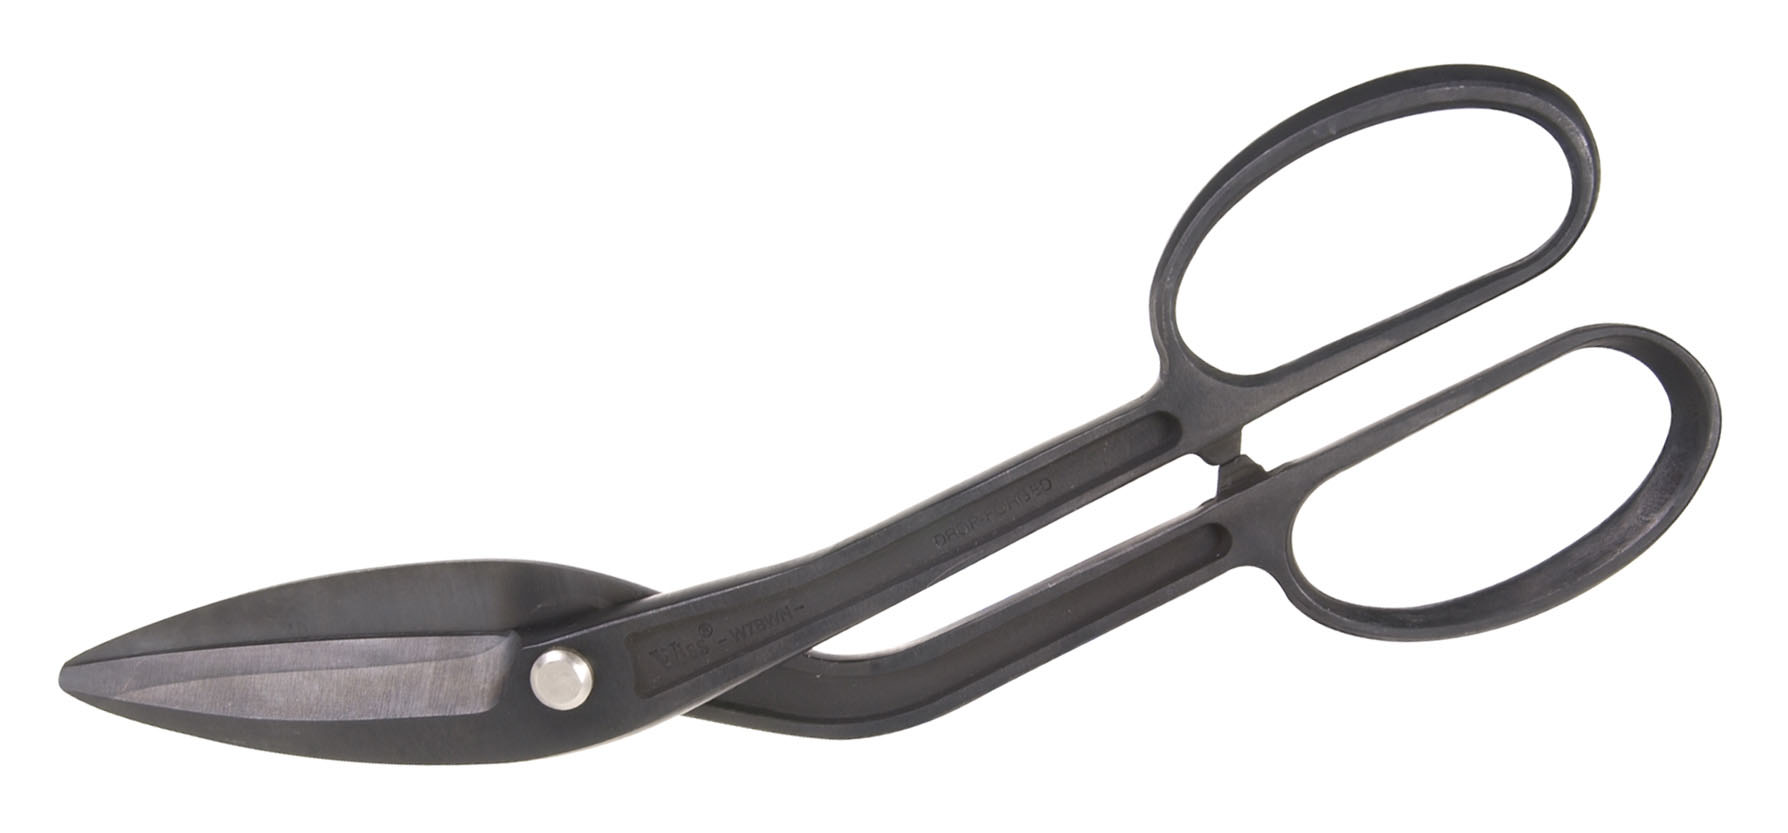 14 1/4" Industrial Offset / Bent Pattern Snips w/o...